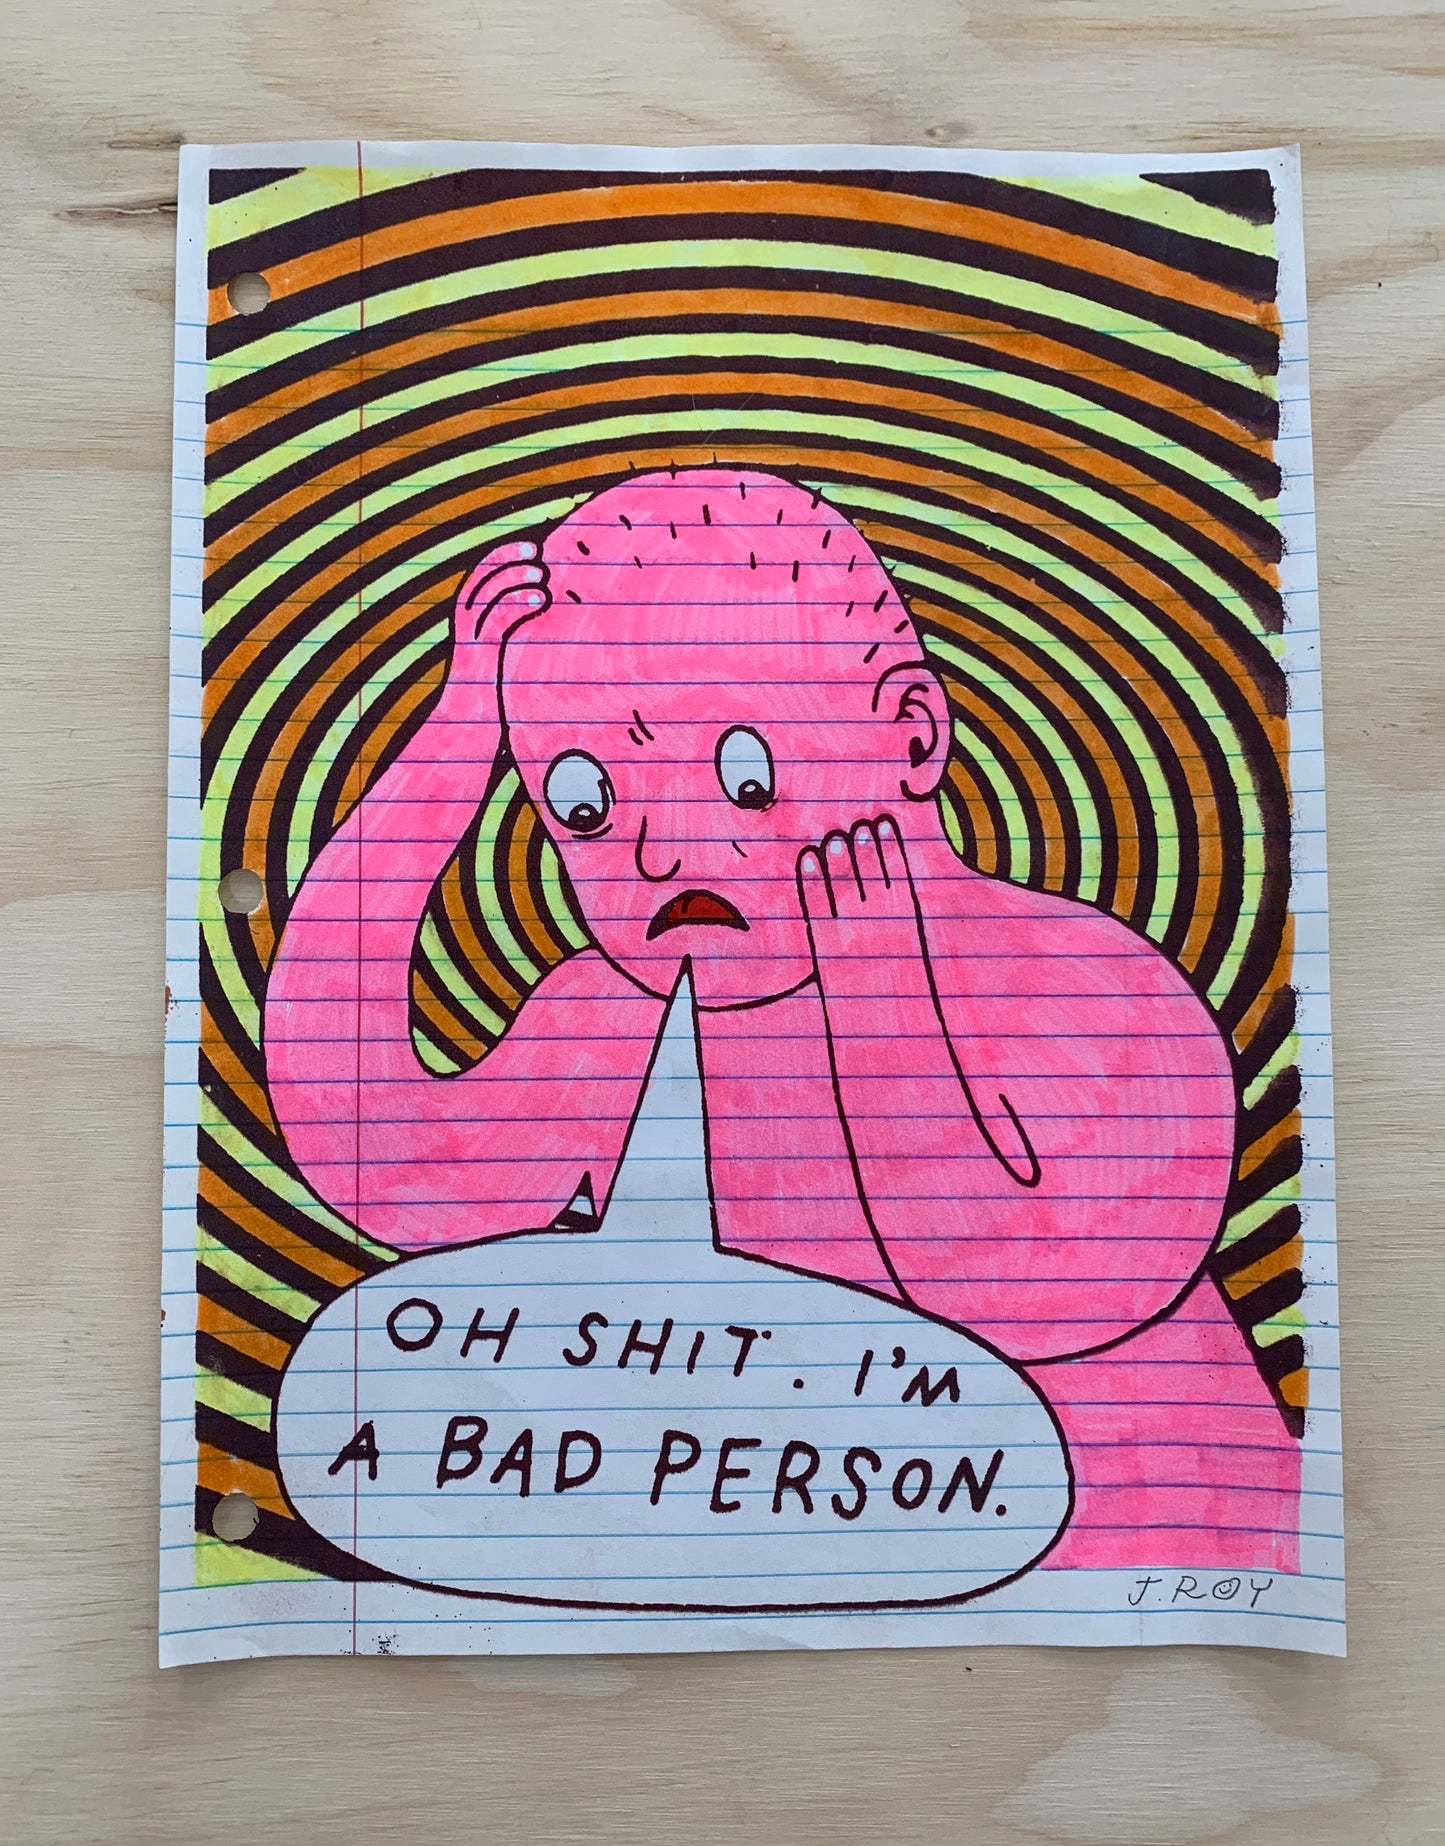 Bad Person by Jason Roy